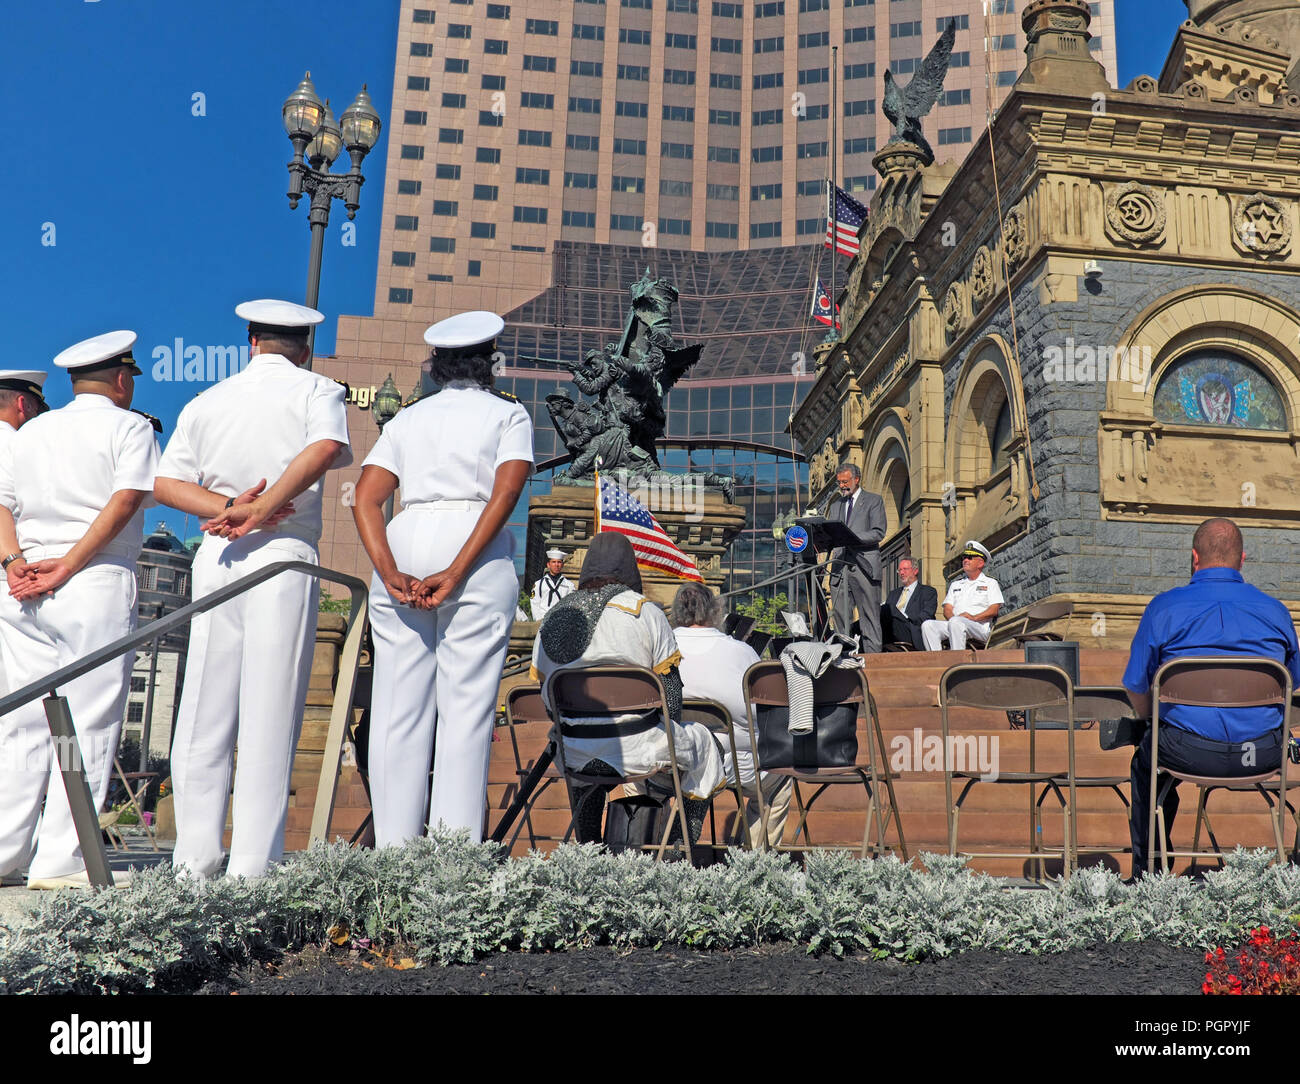 Cleveland, Ohio, USA. 28 Aug, 2018. Members of the US Navy and guests listen to Cleveland Ohio Mayor Frank Jackson proclaim it Navy Week on the steps of the Cuyahoga County Soldiers' and Sailors' Monument.  Credit: Mark Kanning/Alamy Live News. Stock Photo